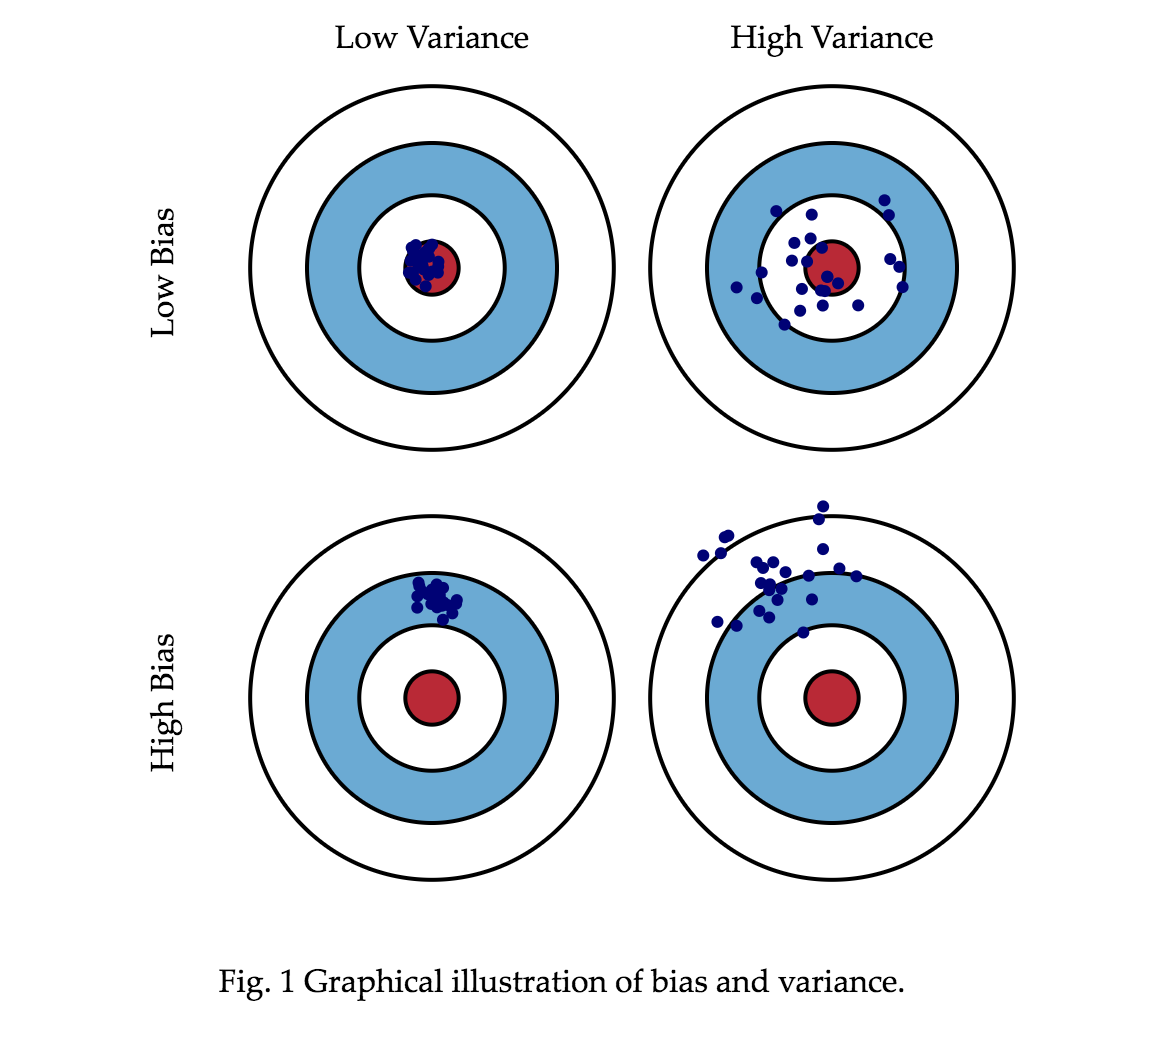 Graphical illustration of bias and variance